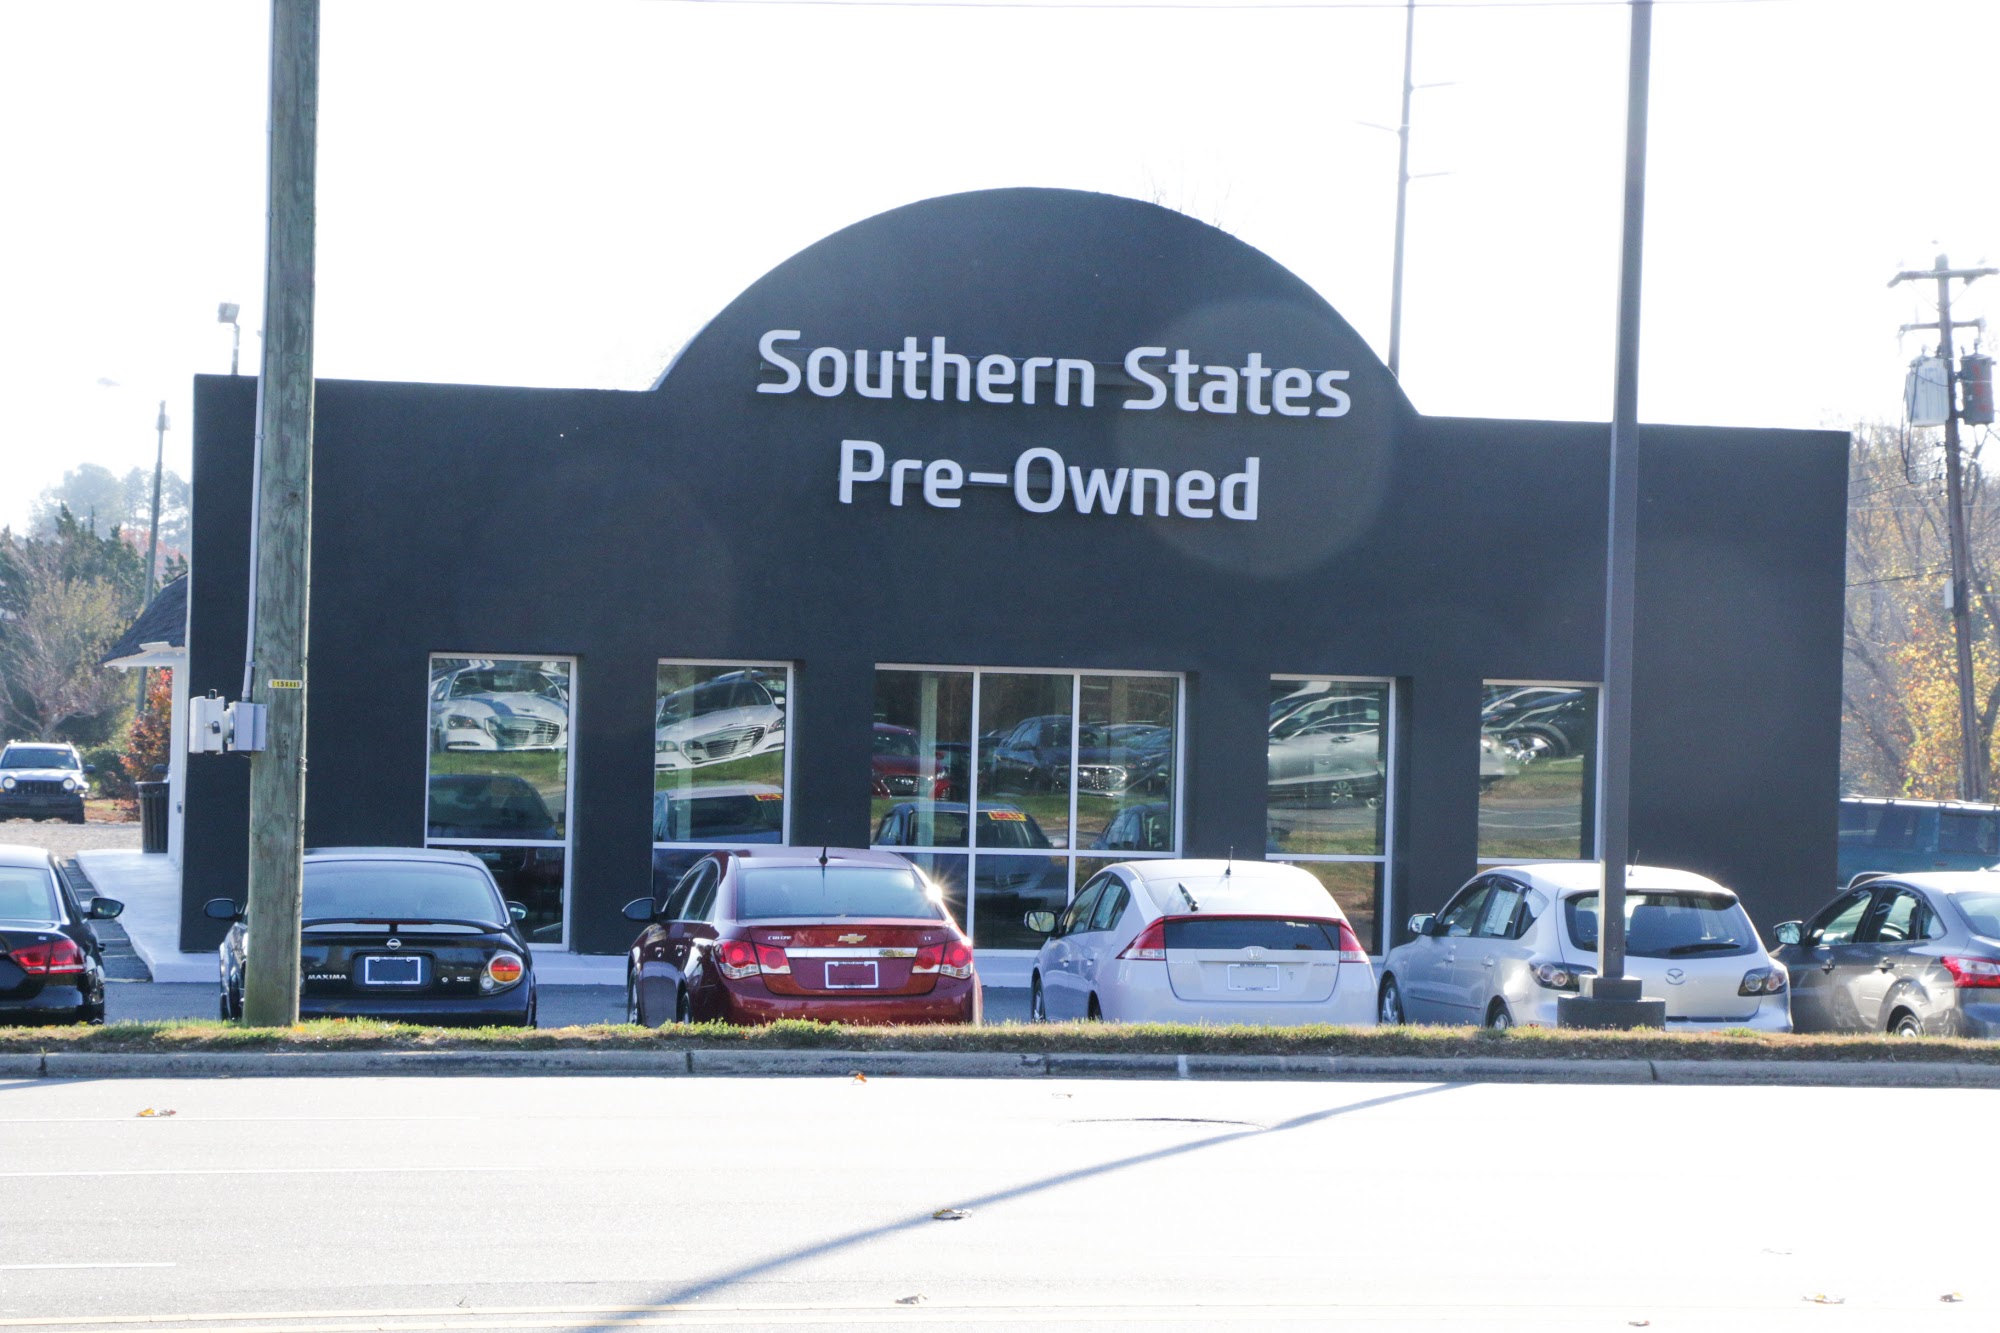 Southern States Pre-Owned